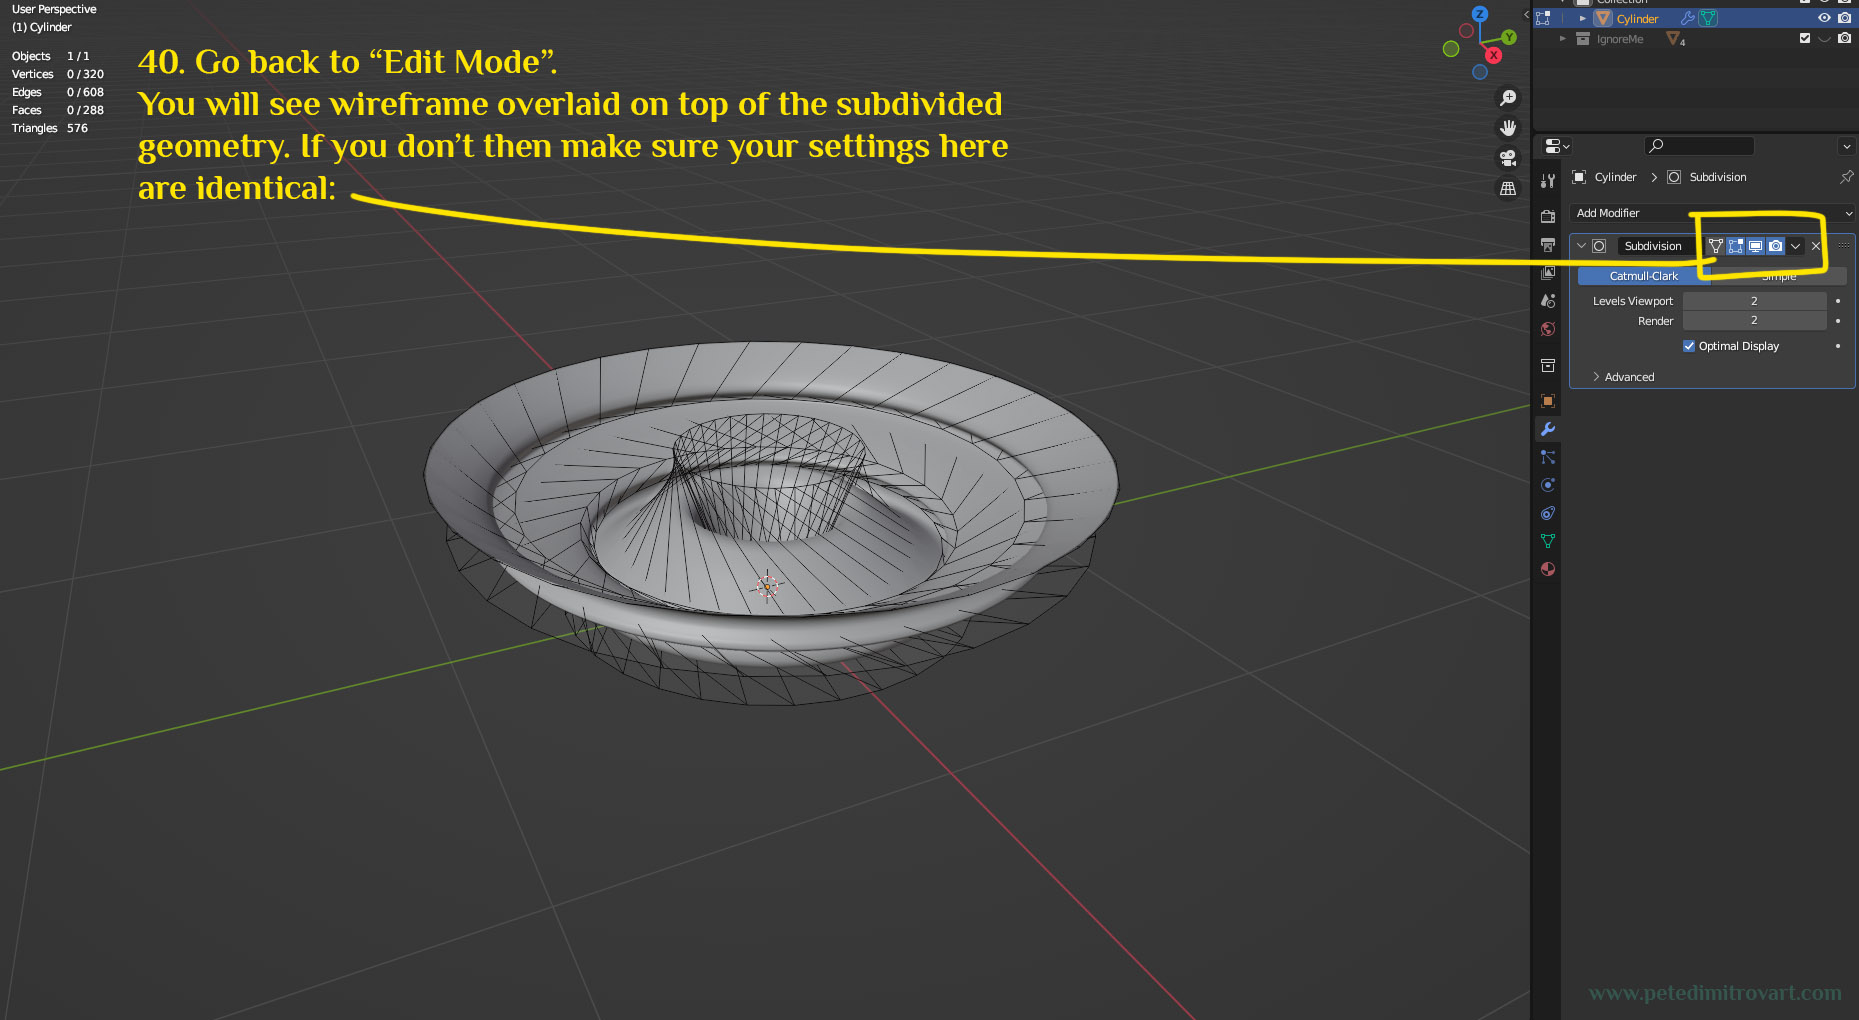 Mesh seen from the side. It is displayed in “Edit Mode” which in combination with the Subdivision modifier makes for a visualization where the smooth, end result of Subdivision is overlaid by a cage.